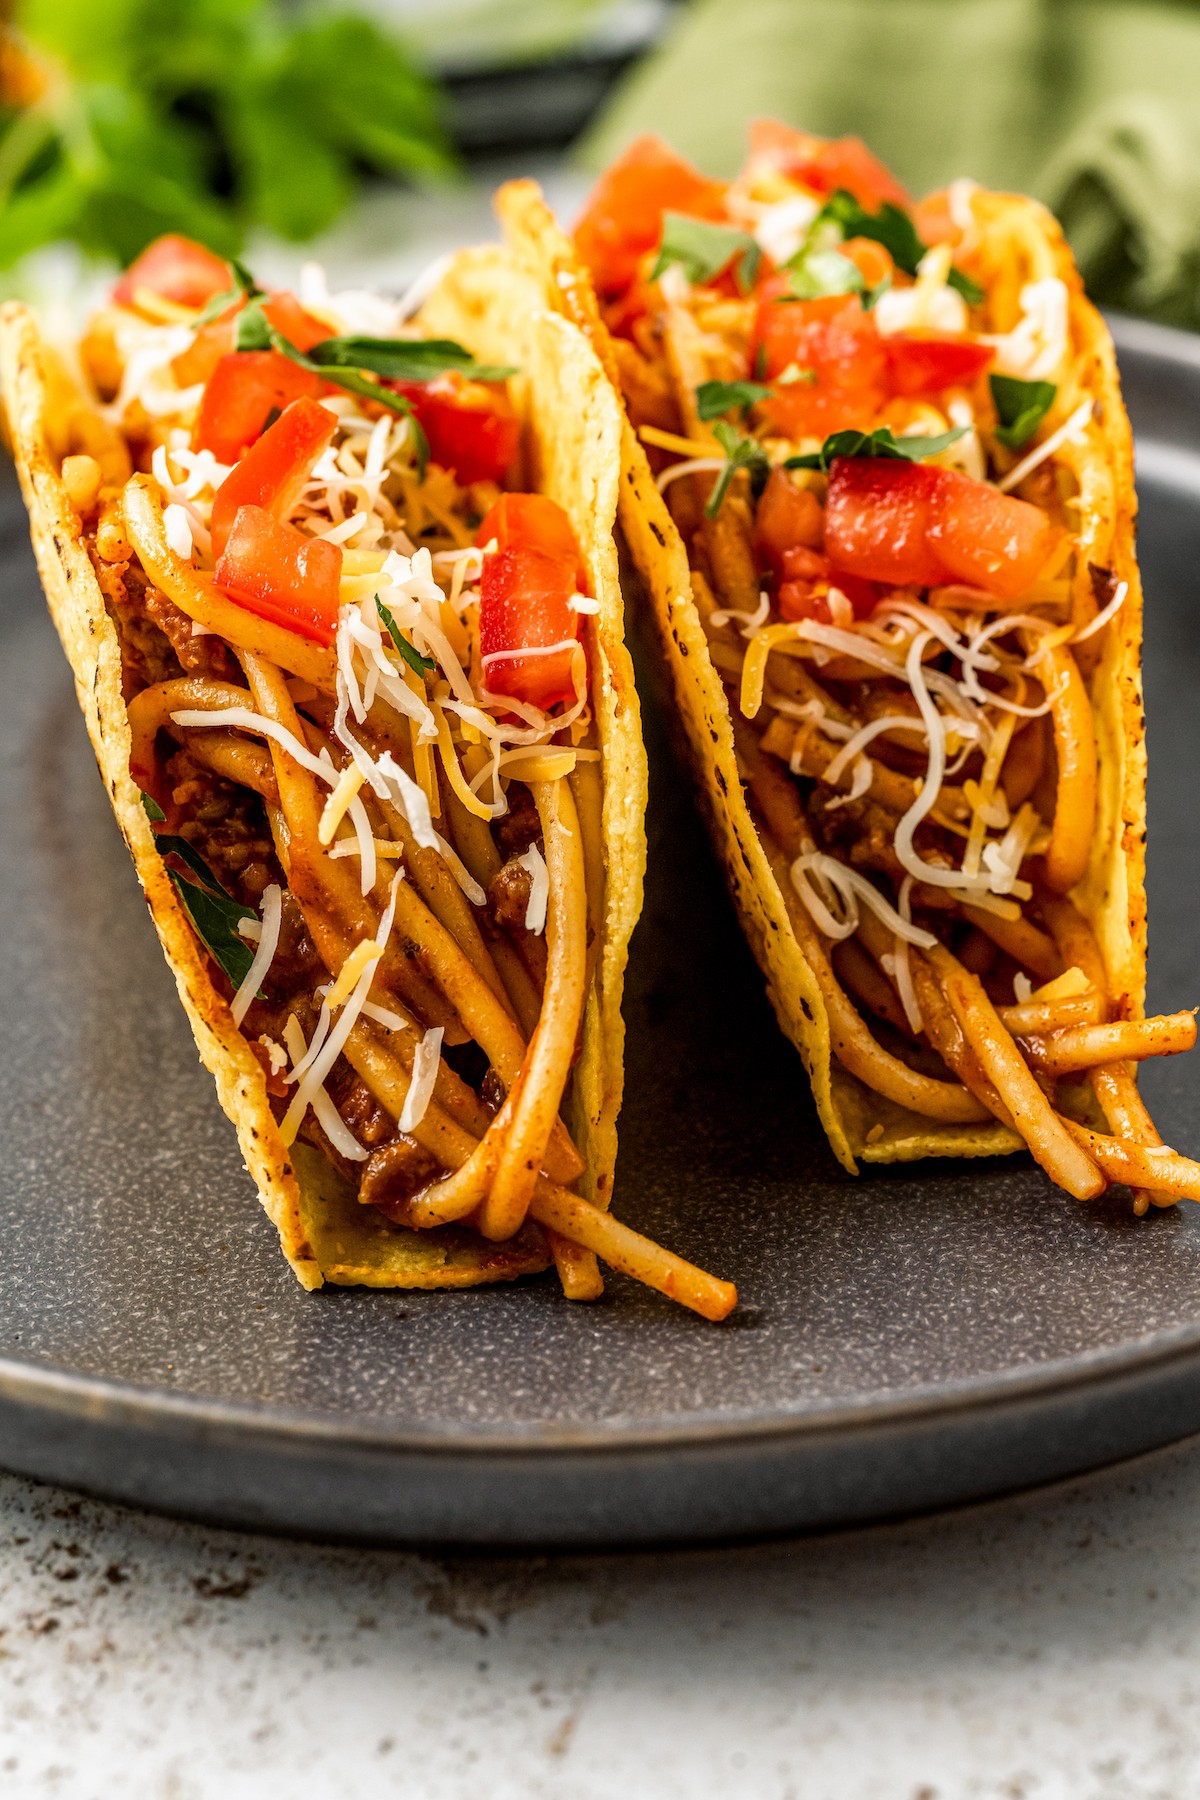 Two tacos from the side, showing the pasta inside and layers of toppings.